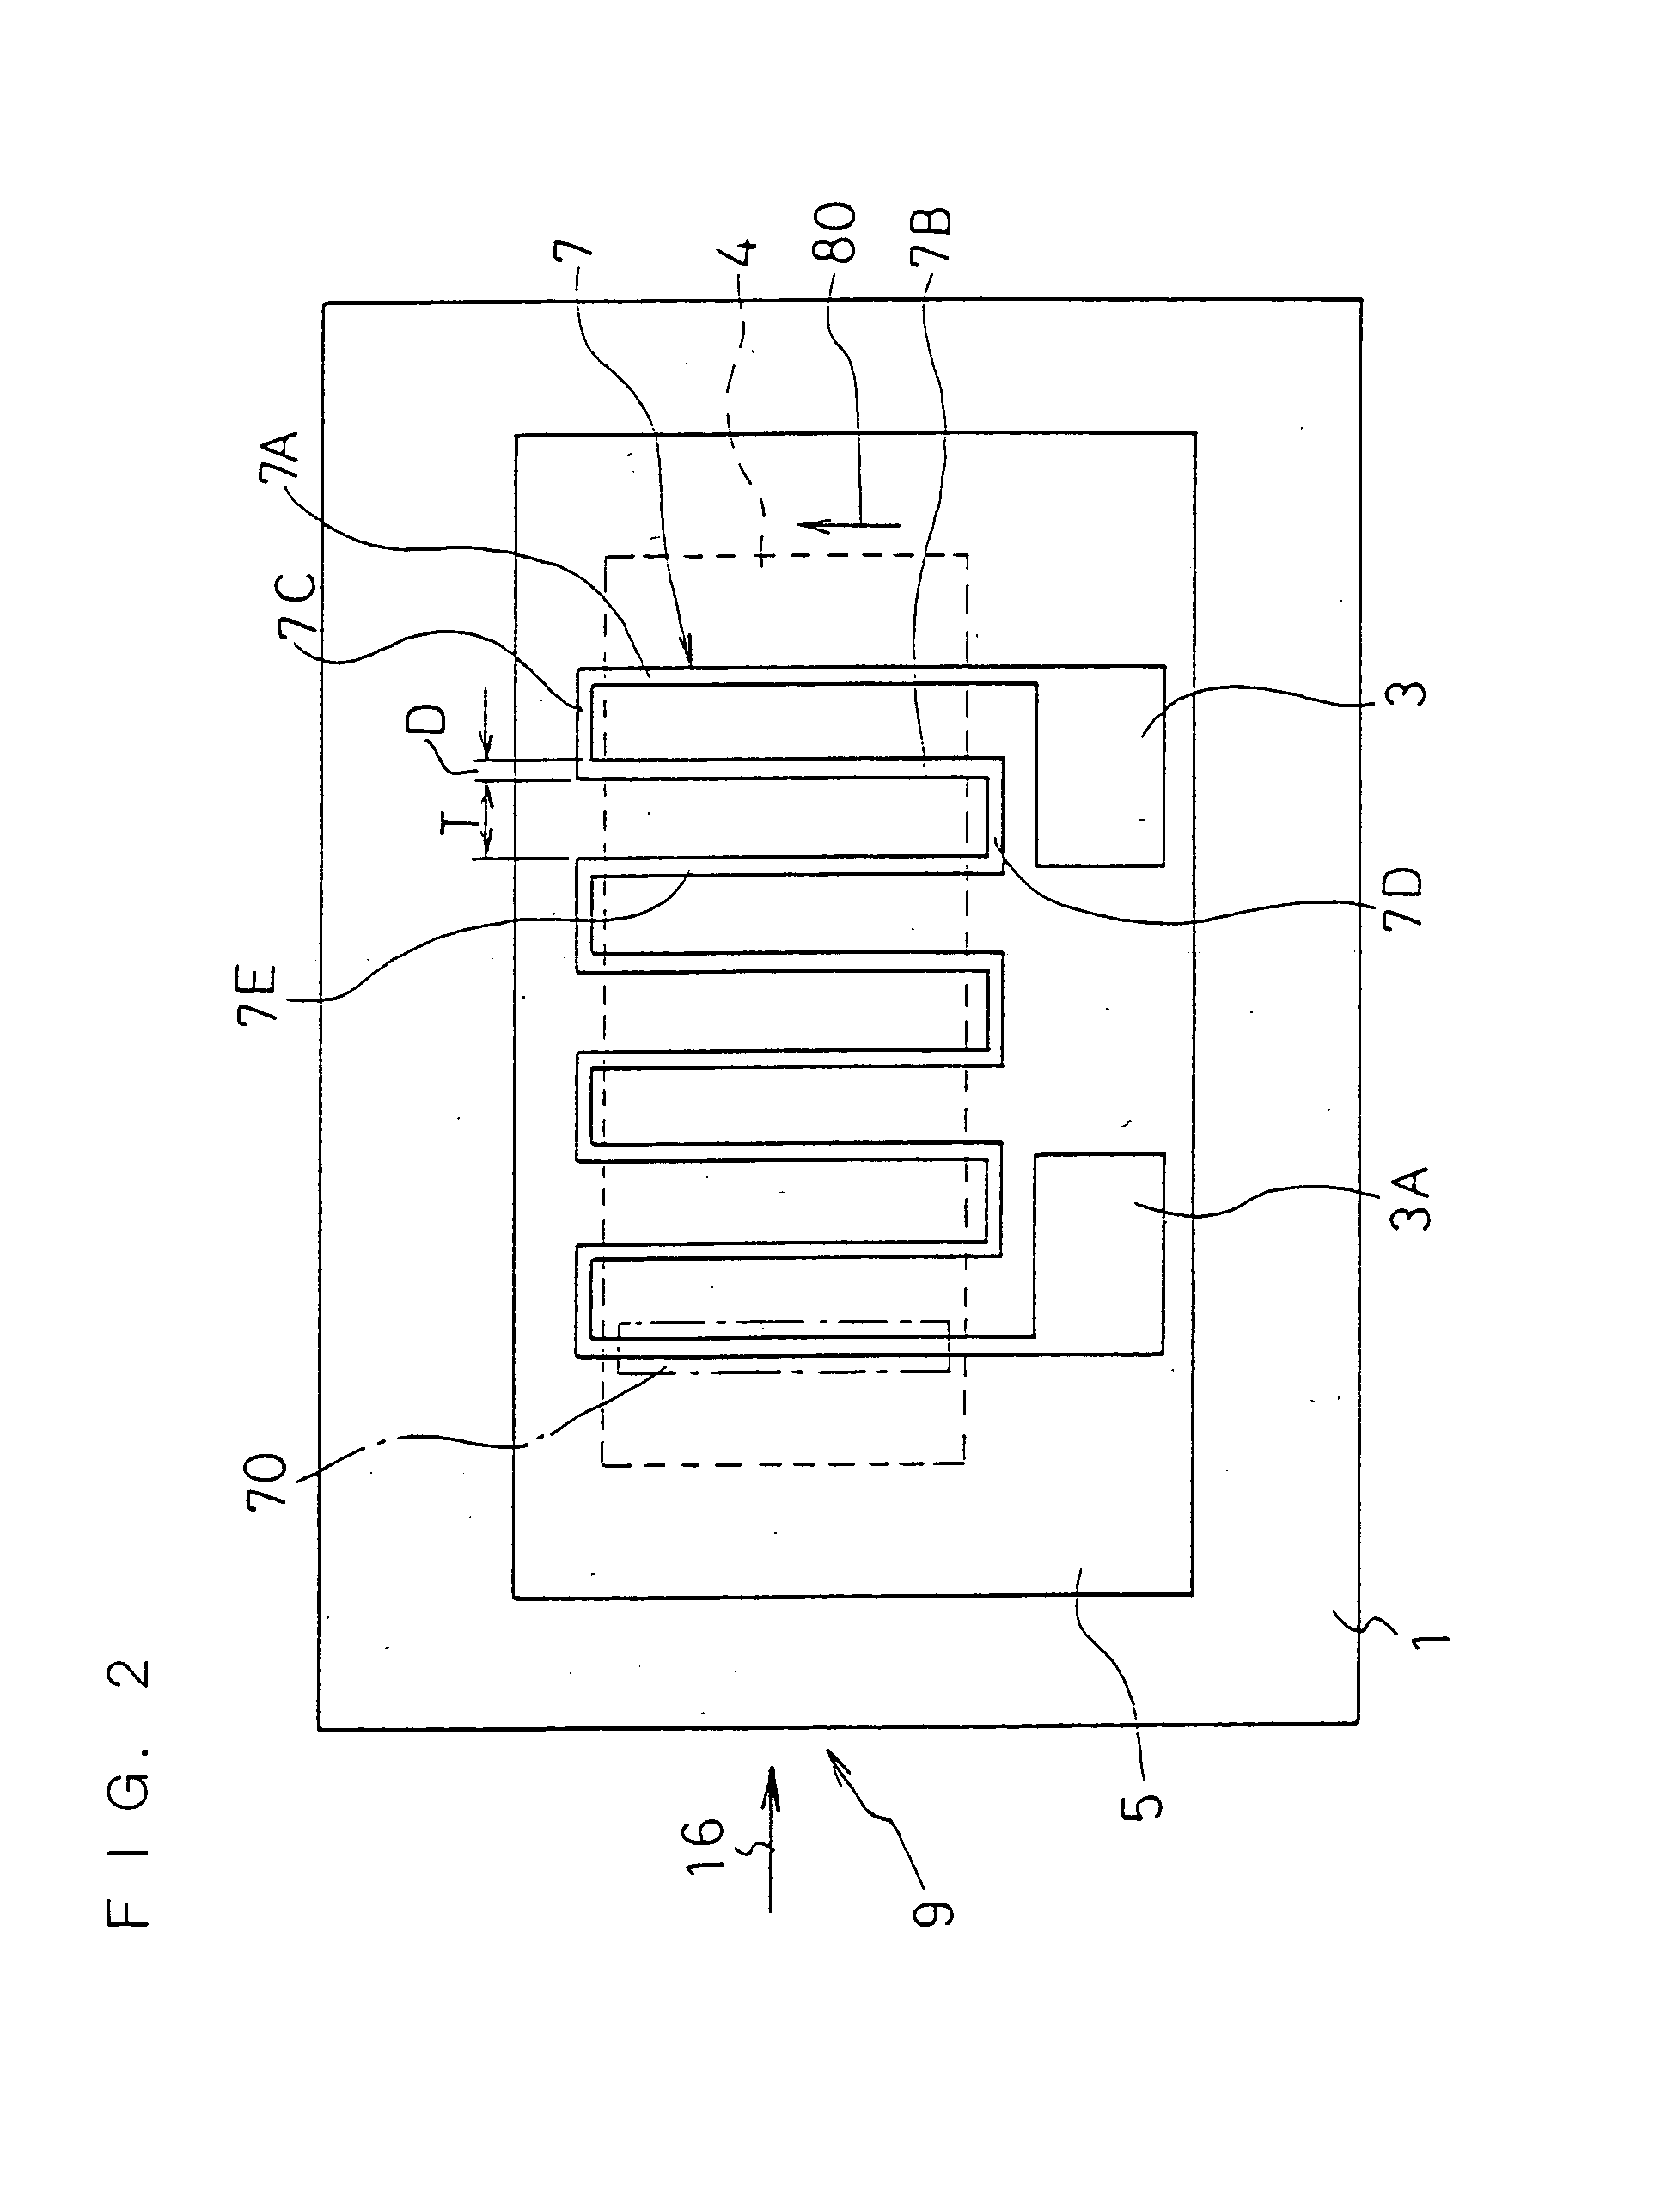 Magnetic sensor having a closed magnetic path formed by soft magnetic films